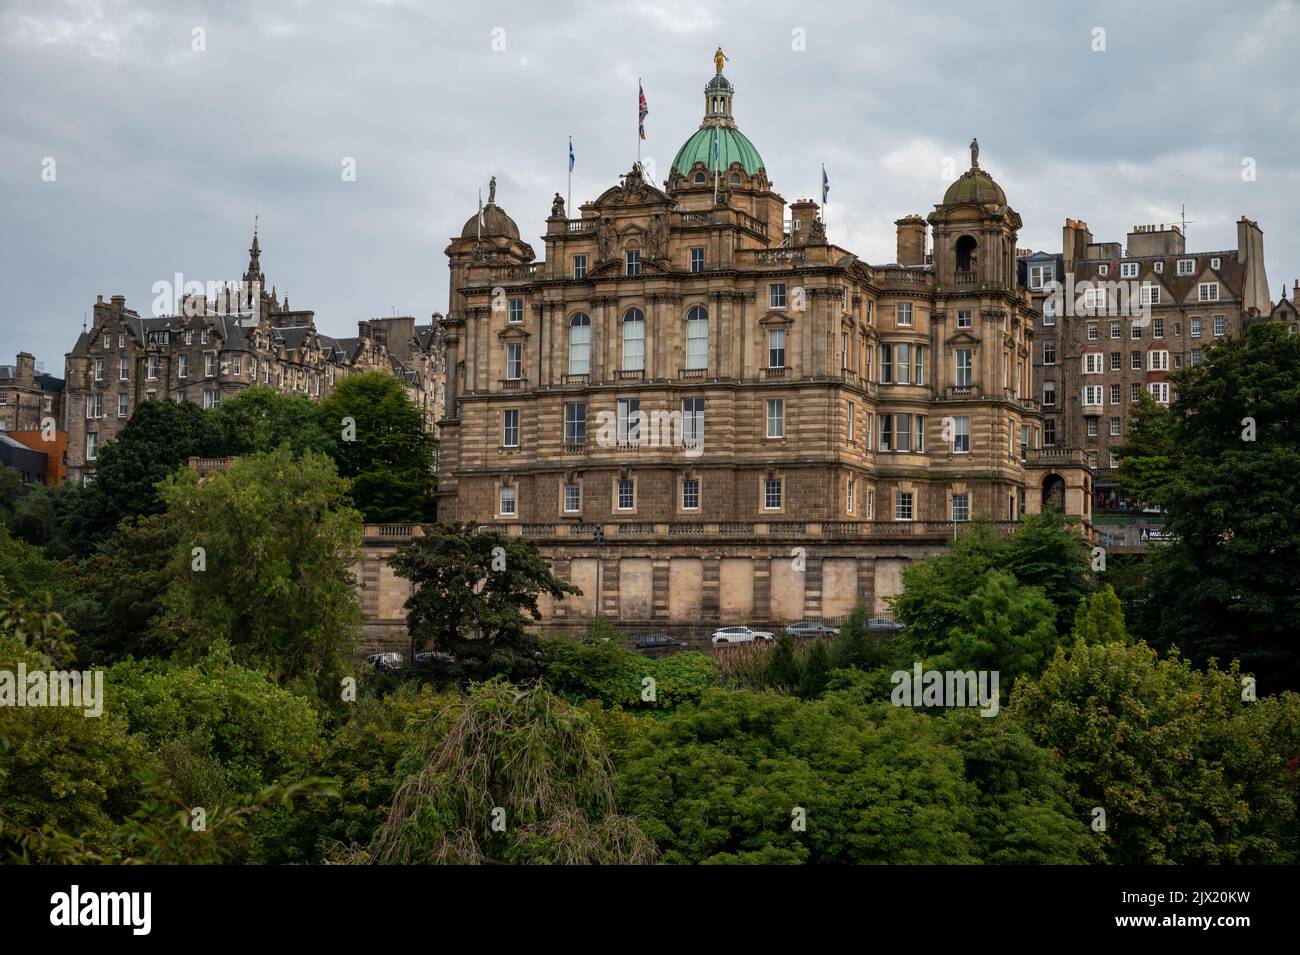 View from Princes street to old town and castle in Edinburgh city, view on houses, hills and trees in old part of the city, Scotland, UK in summer Stock Photo